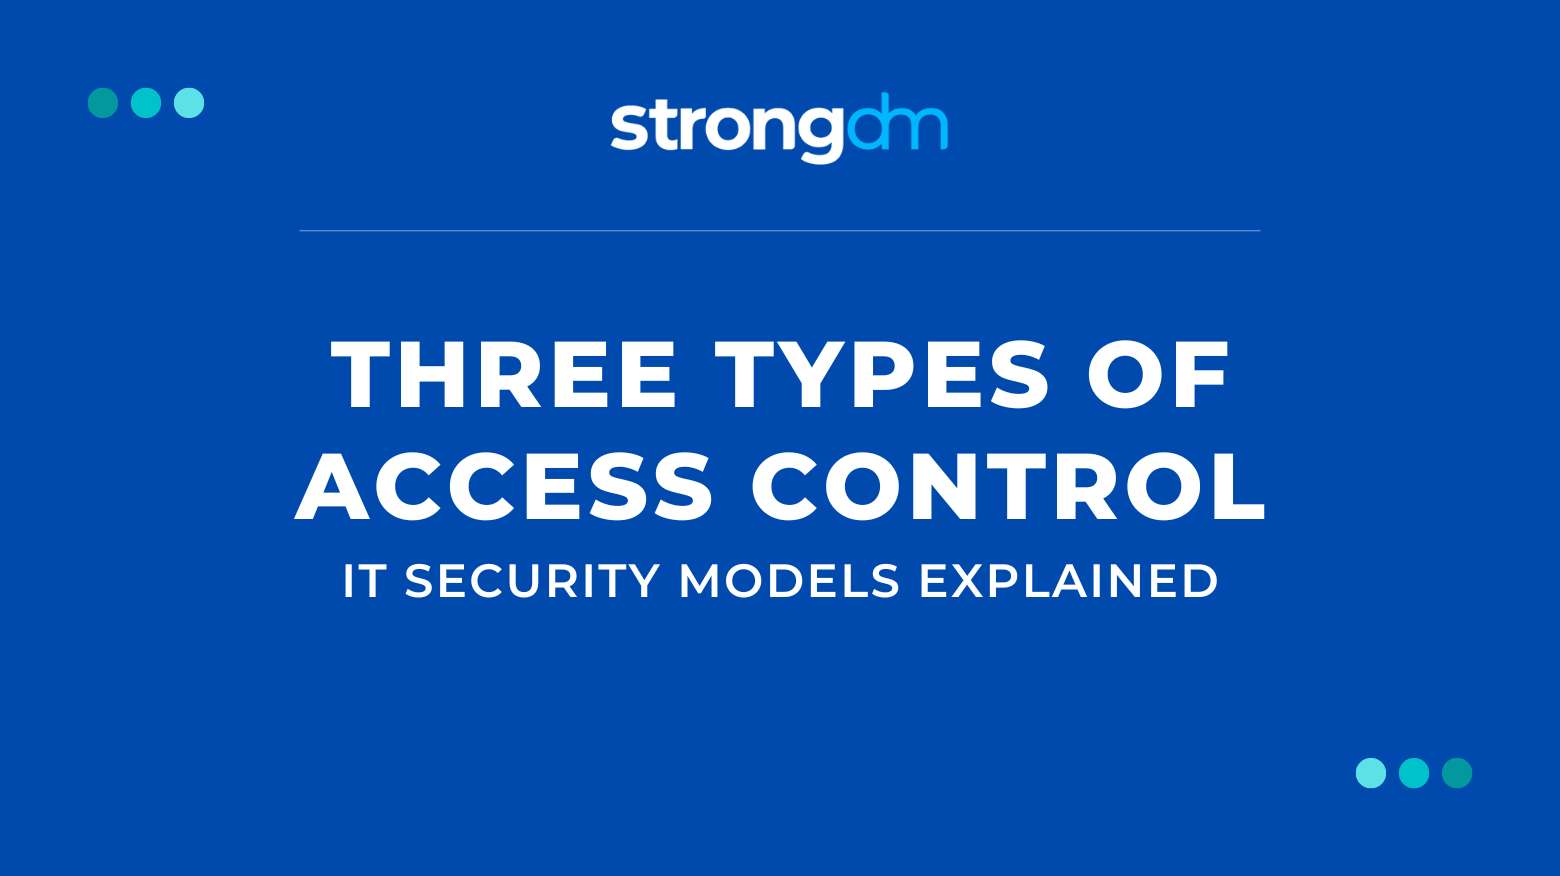 3 Types of Access Control: IT Security Models Explained